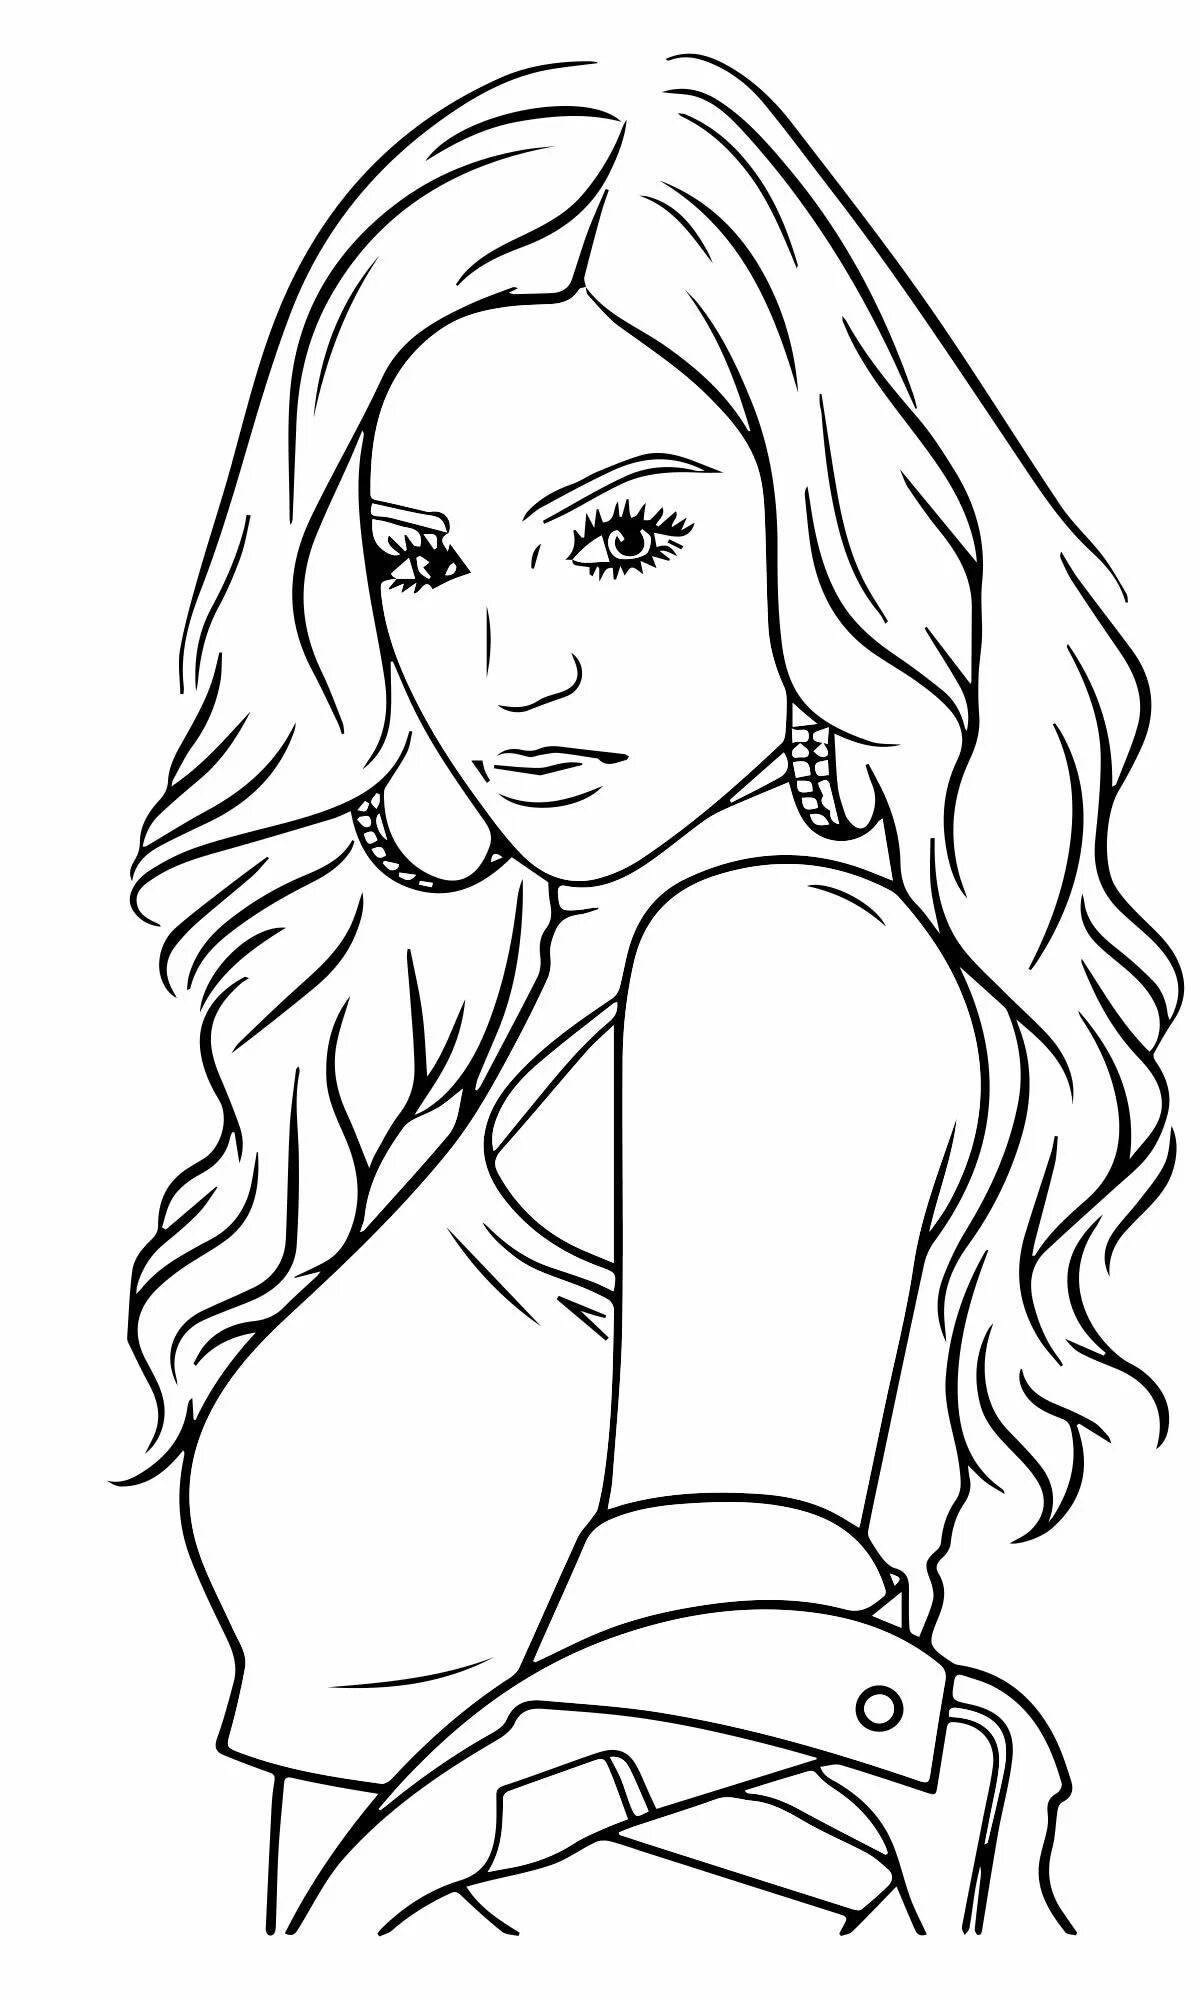 Laura funny coloring book